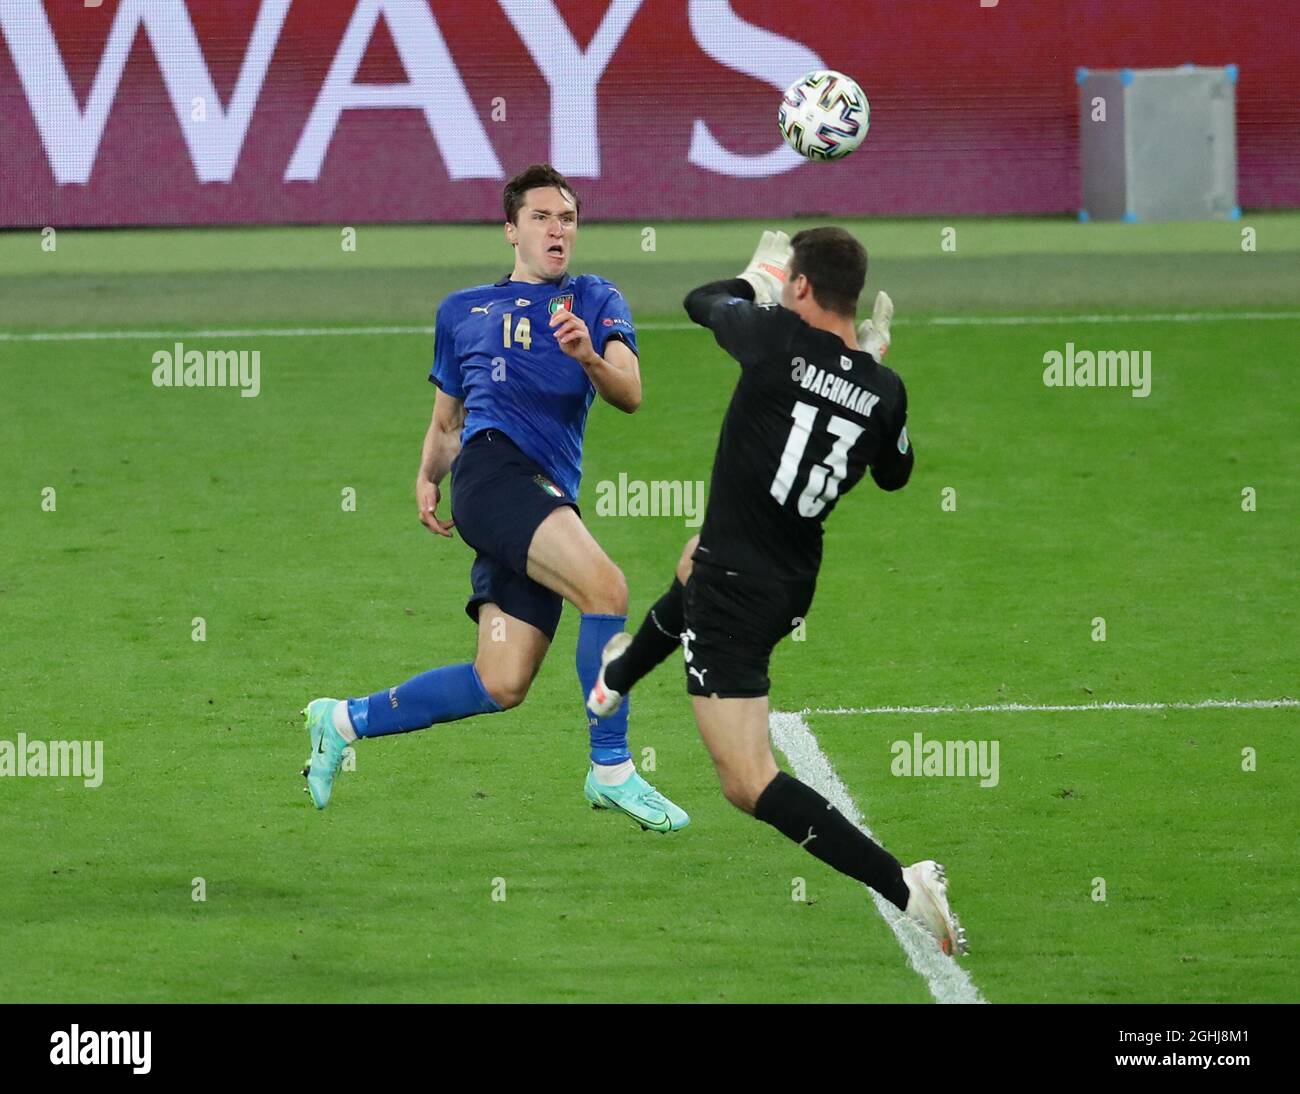 London, England, 26th June 2021.  Federico Chiesa of Italy attempts to chip Daniel Bachmann of Austria during the UEFA European Championships match at Wembley Stadium, London. Picture credit should read: David Klein / Sportimage via PA Images Stock Photo